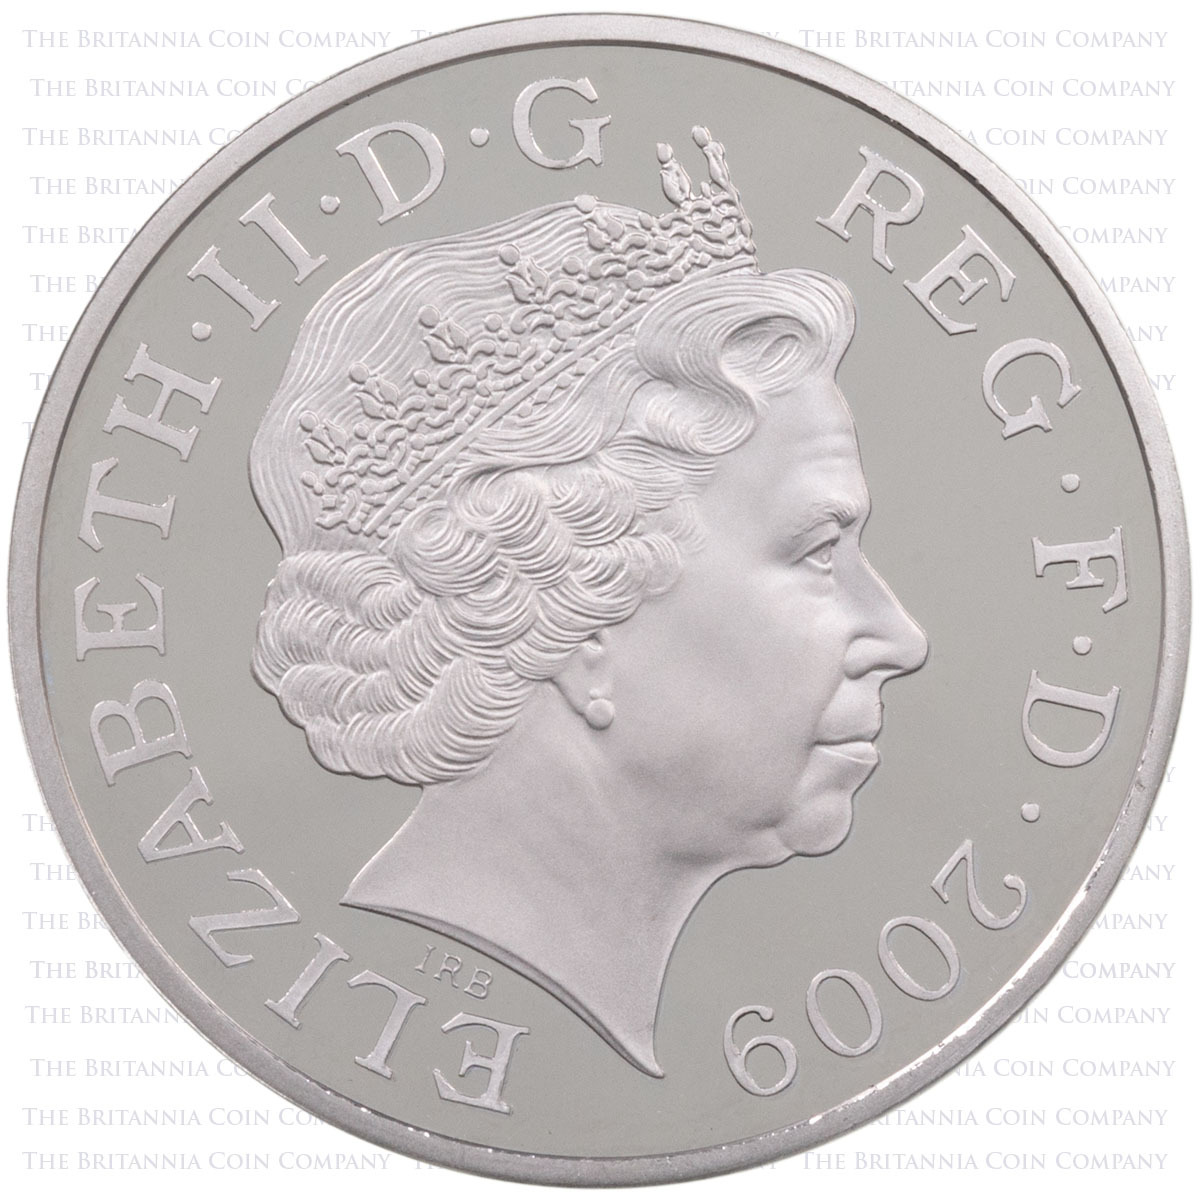 2009 Henry VIII Accession 500th Anniversary Five Pound Crown Piedfort Platinum Proof Coin Obverse